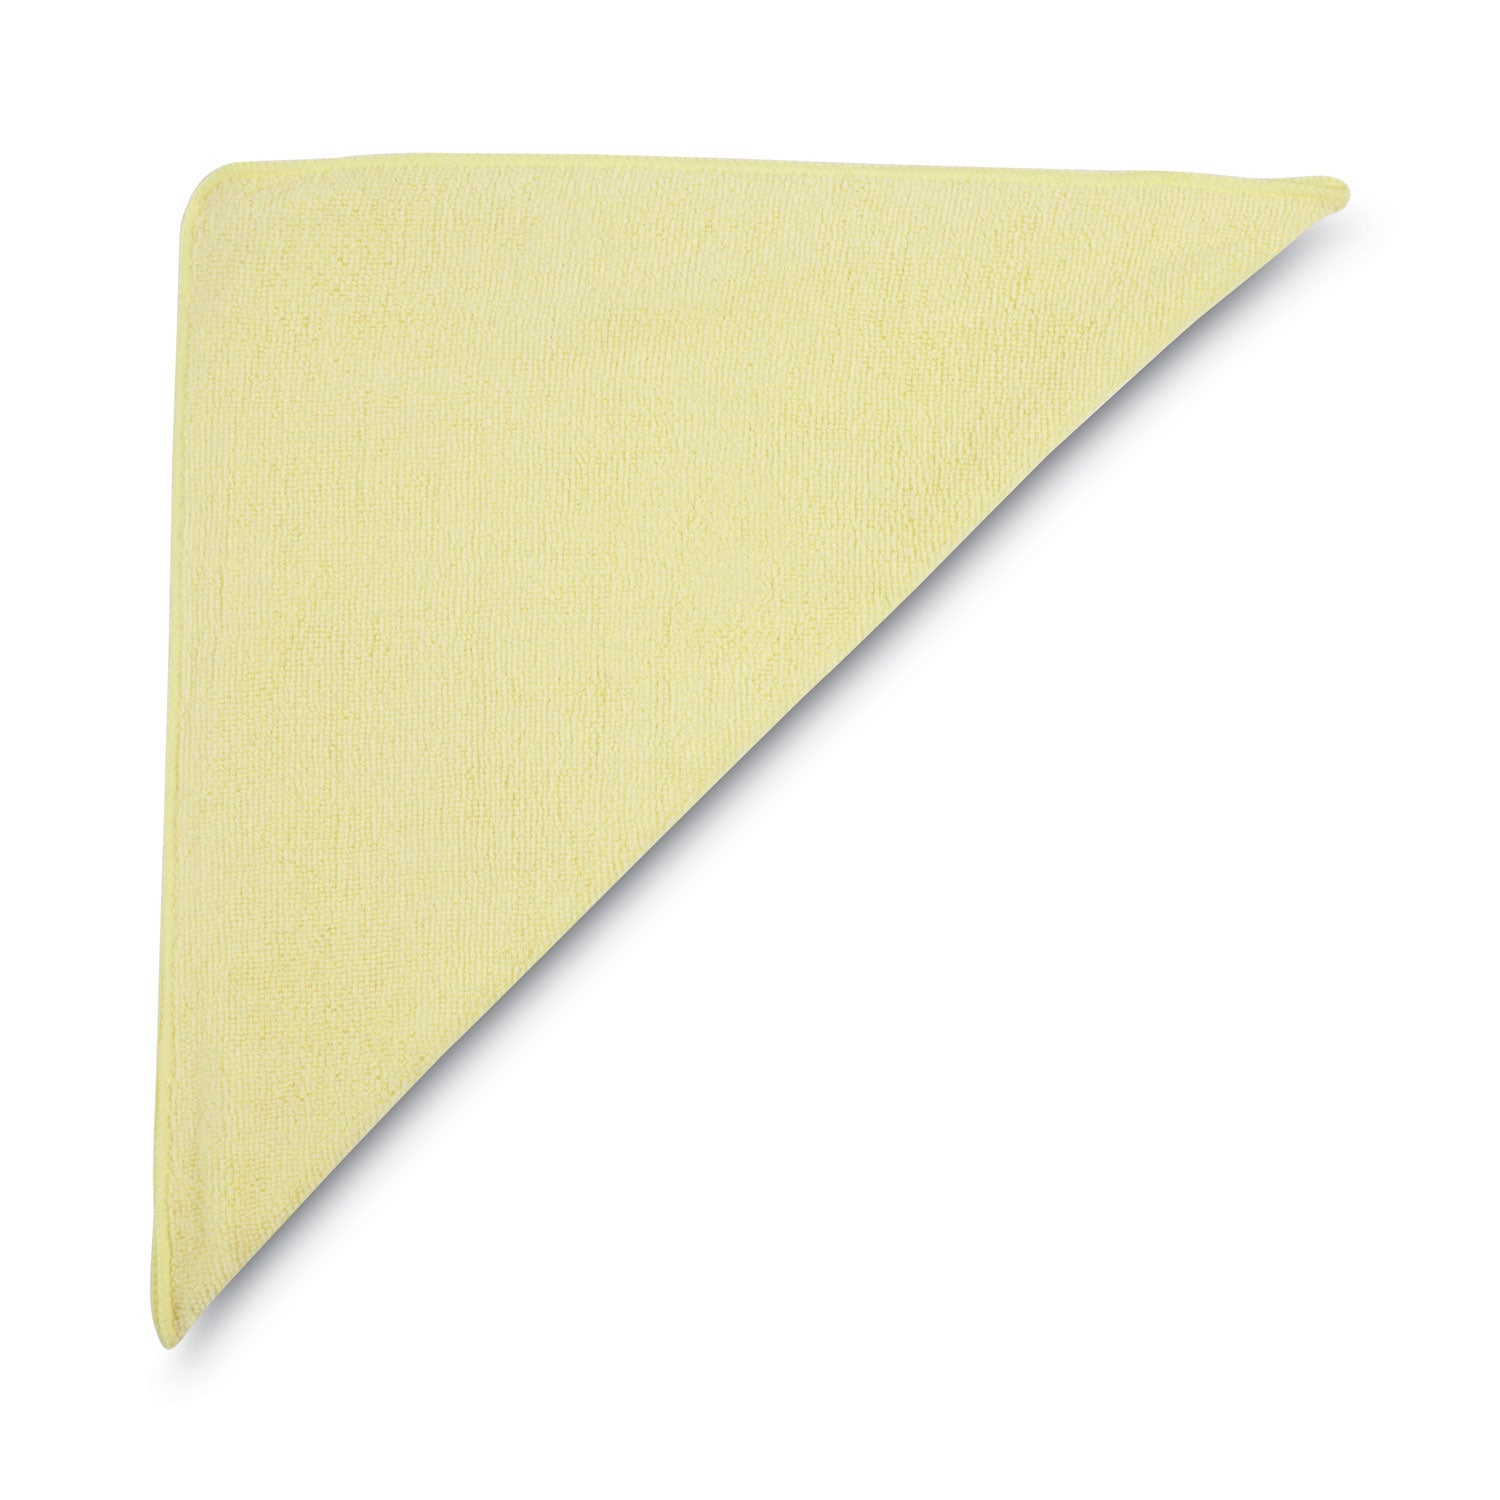 Microfiber Cleaning Cloths, 16 x 16, Yellow, 24/Pack - 